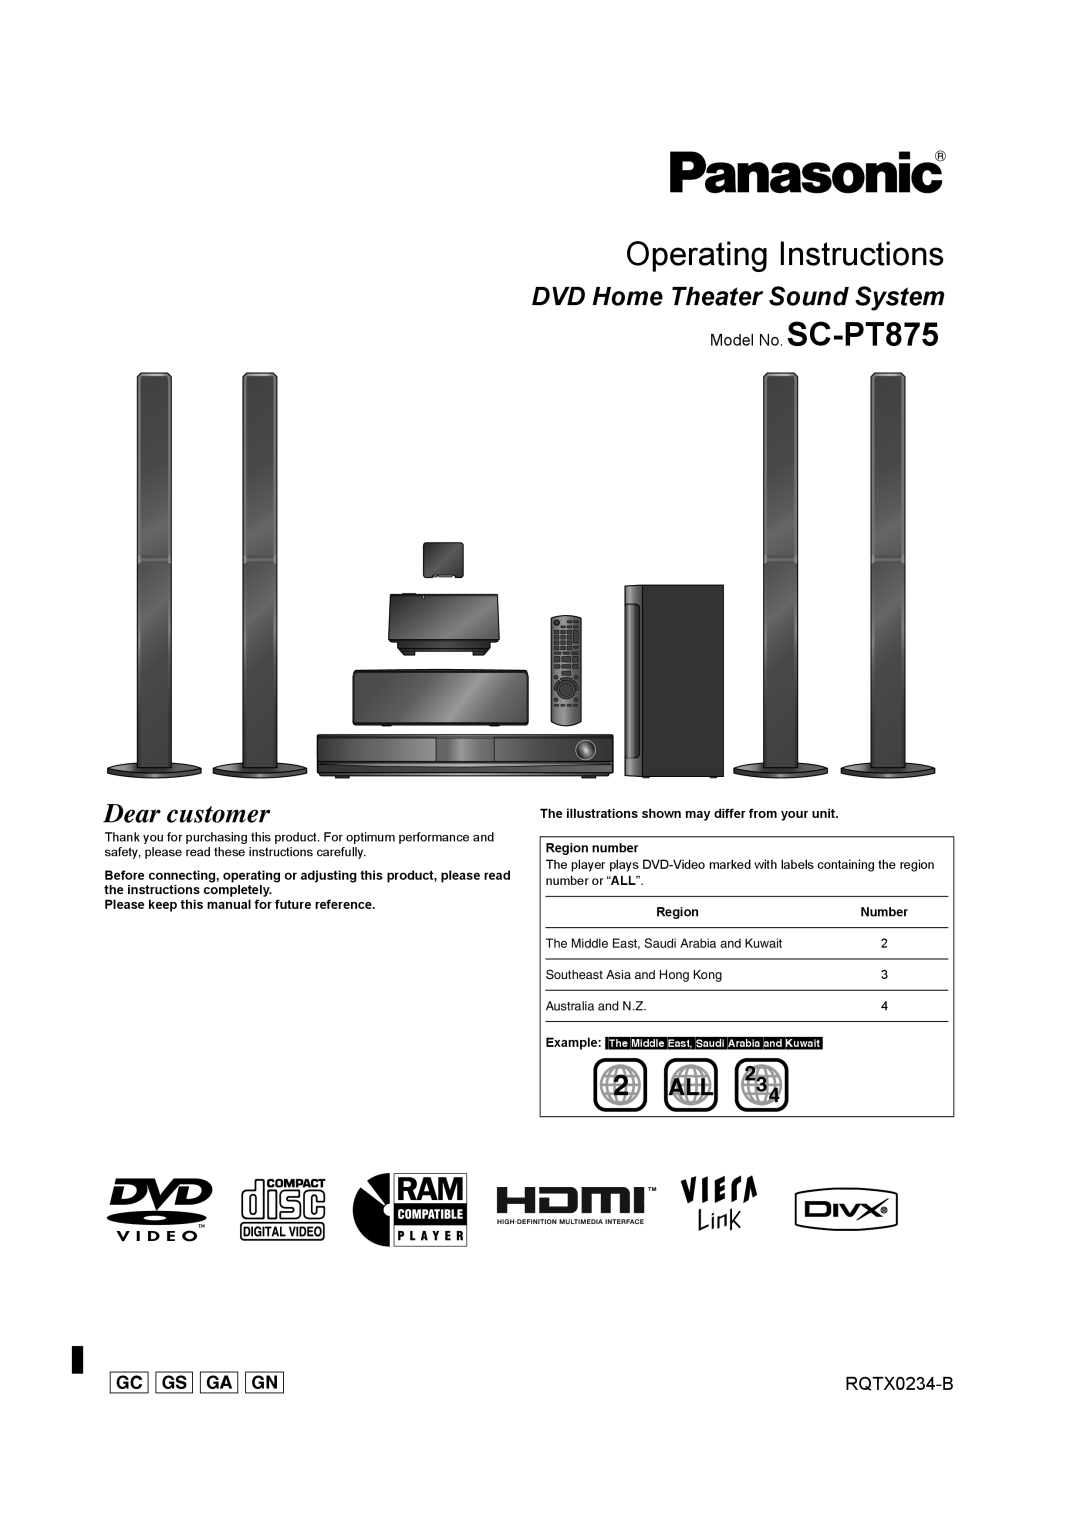 Panasonic operating instructions DVD Home Theater Sound System, RQTX0234-B, Model No. SC-PT875, Operating Instructions 